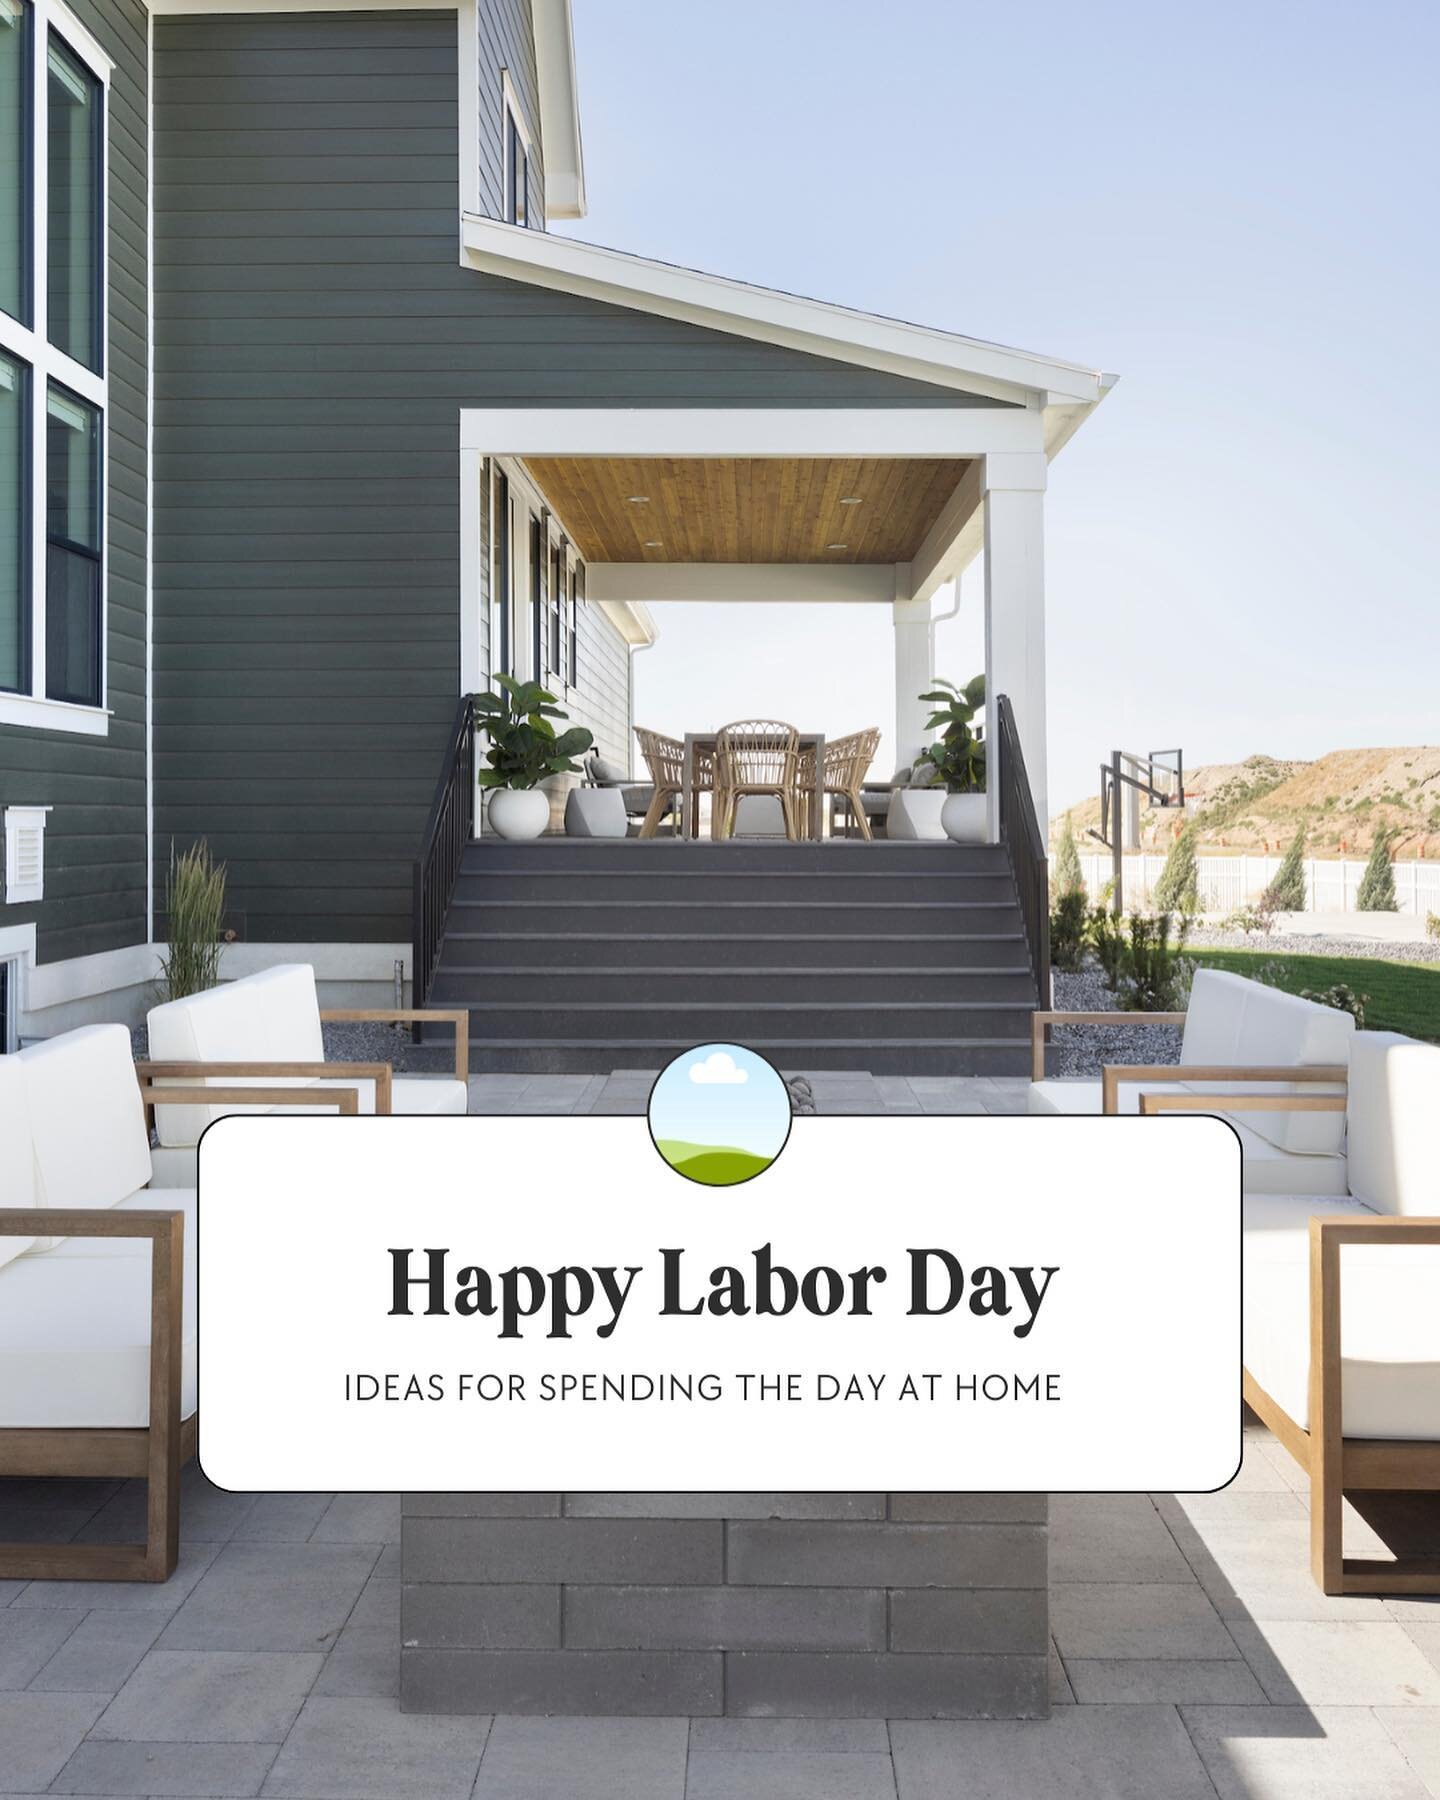 Put up your feet, ya&rsquo;ll! The Labor Day weekend is here! YES!

If you're keeping it low-key at home this year, here are a handful of ways to spend the weekend:&nbsp;

- Kick off the celebration with breakfast delivered from your favorite local s